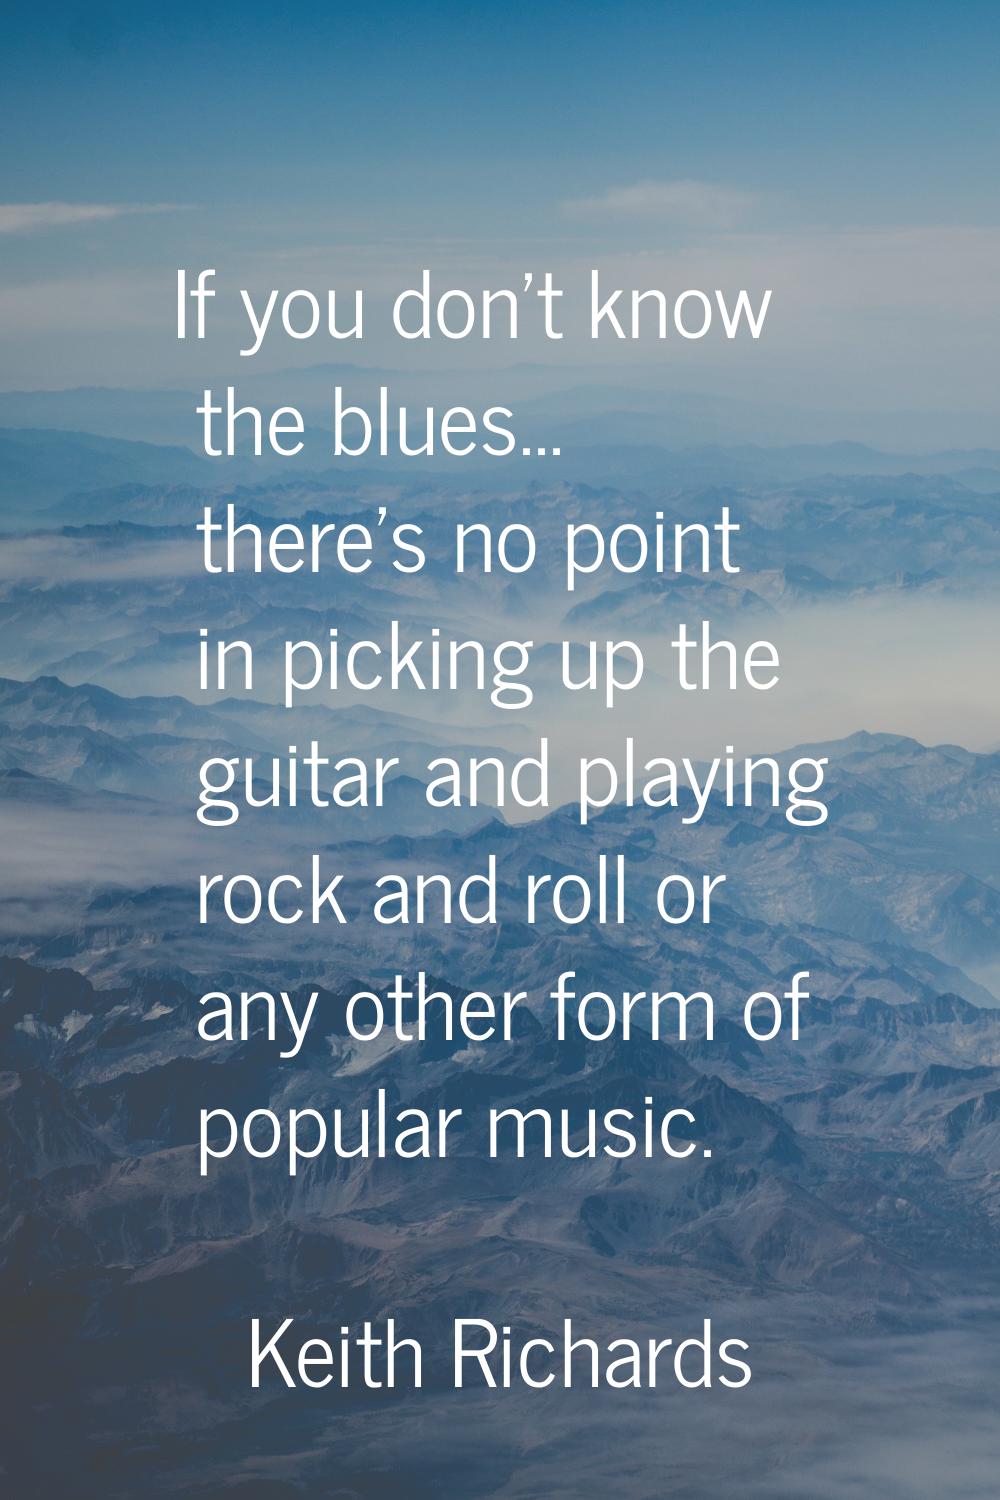 If you don't know the blues... there's no point in picking up the guitar and playing rock and roll 